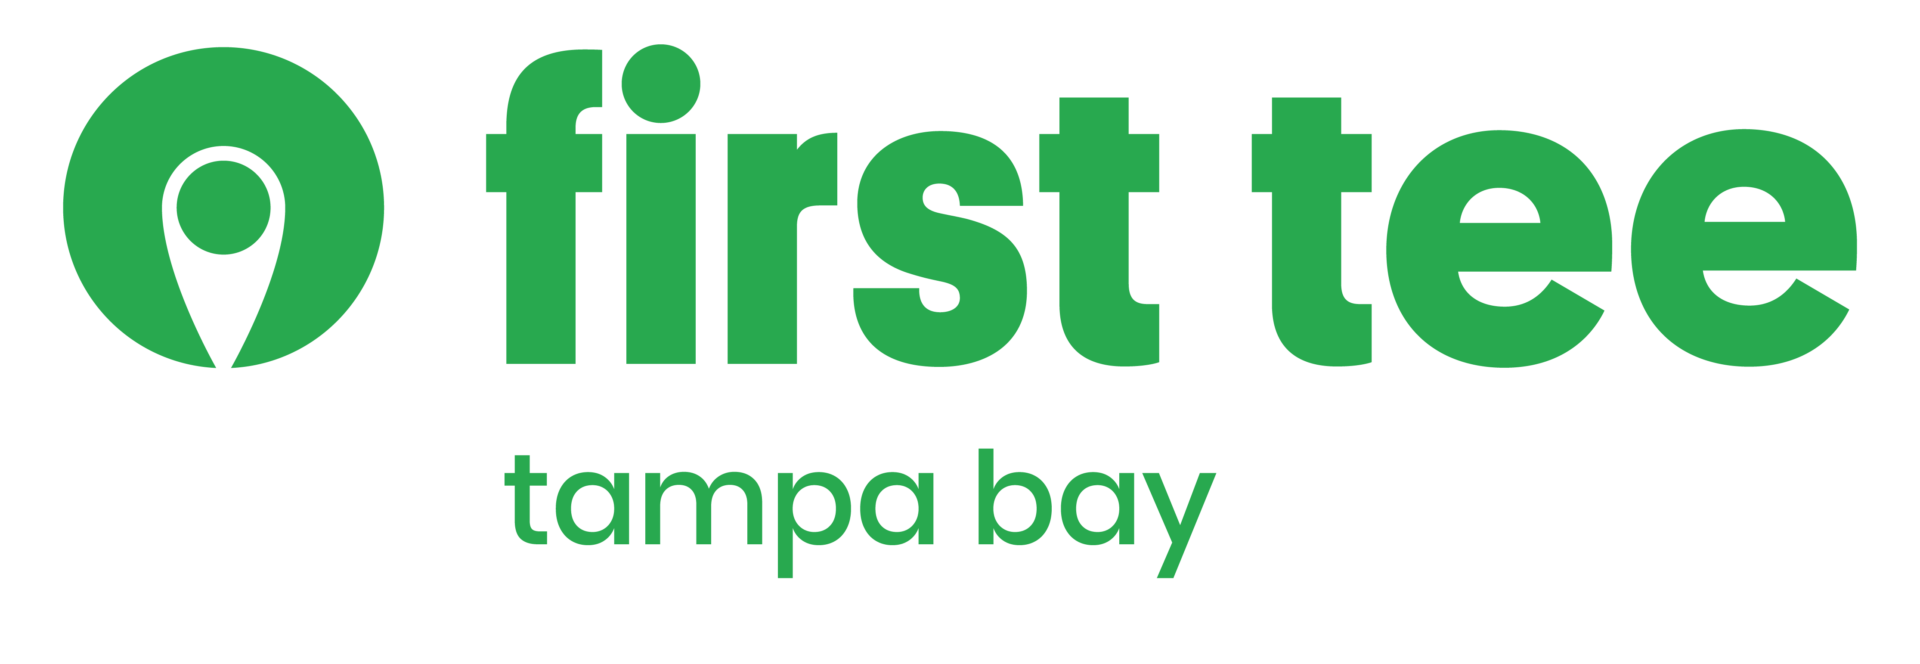 New Official First Tee Logo PNG First Tee Tampa Bay